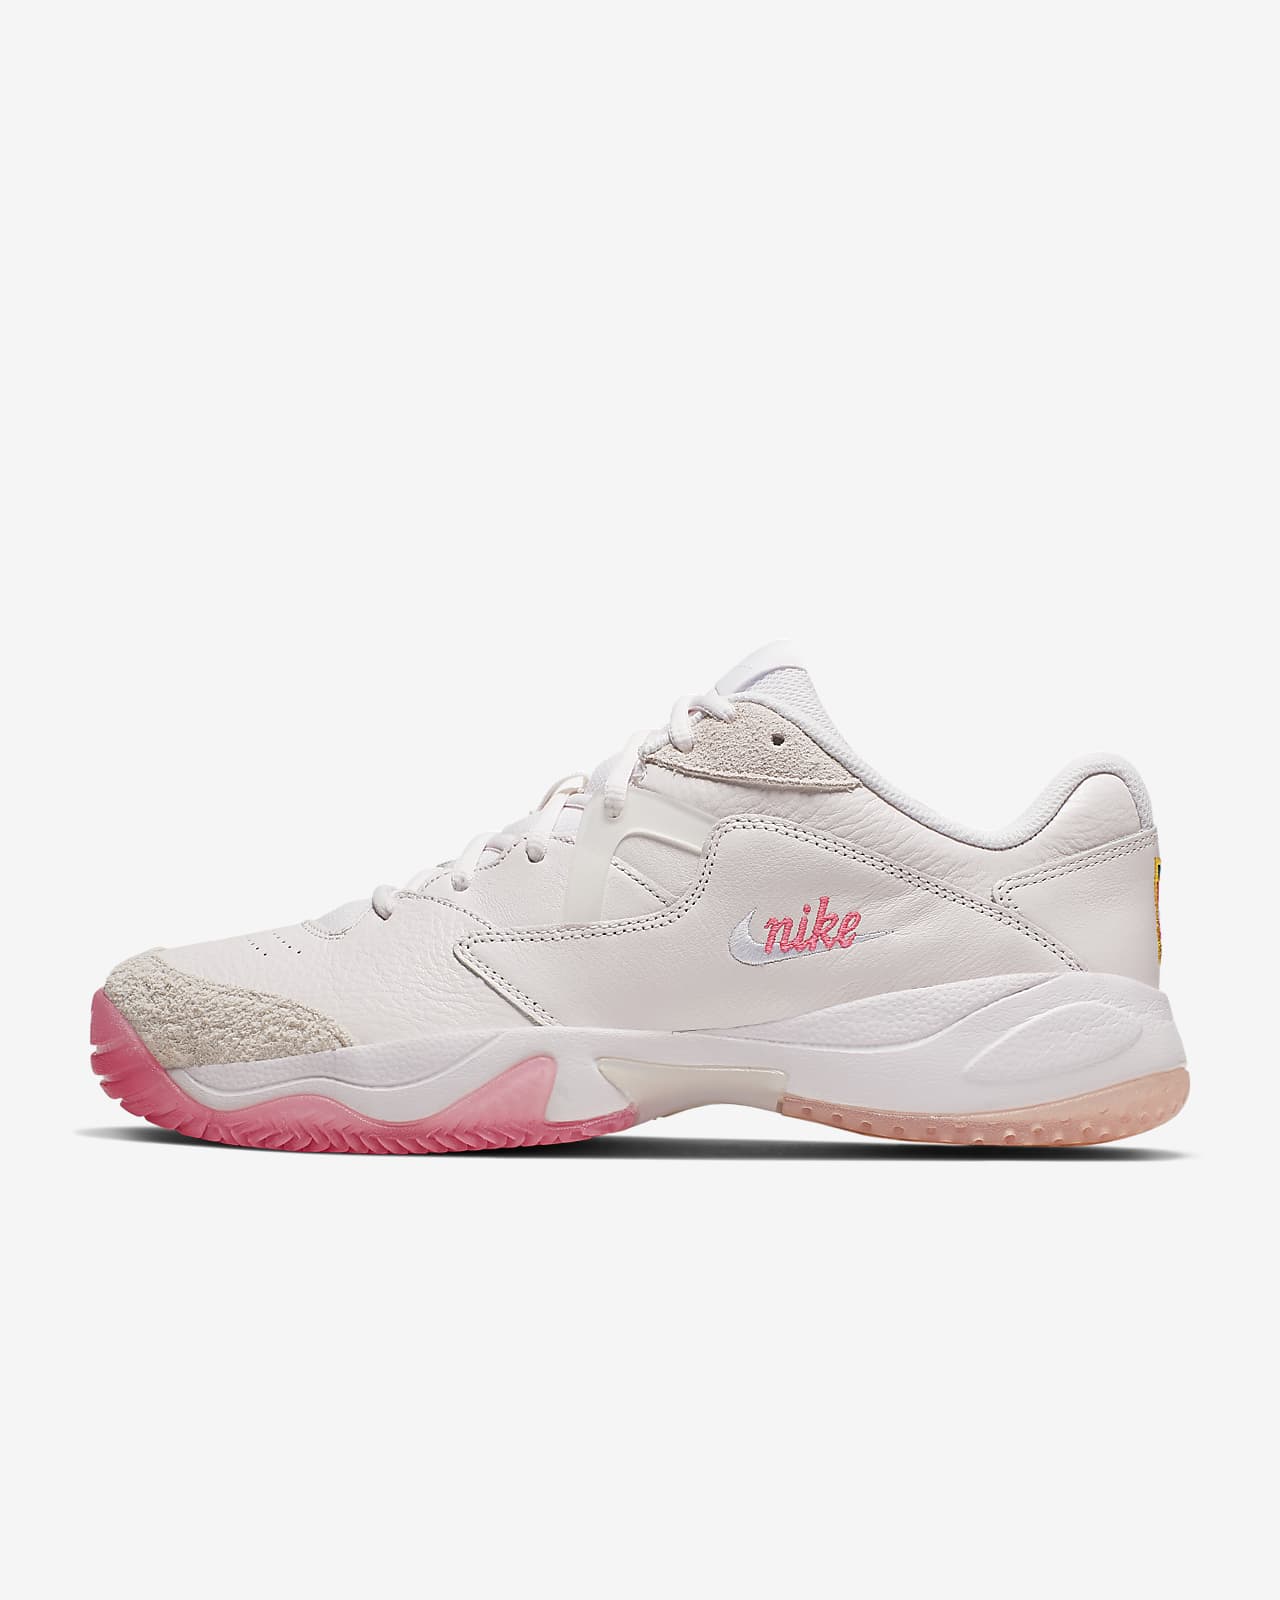 nike court lite 21 off 66% - axnosis.co.uk